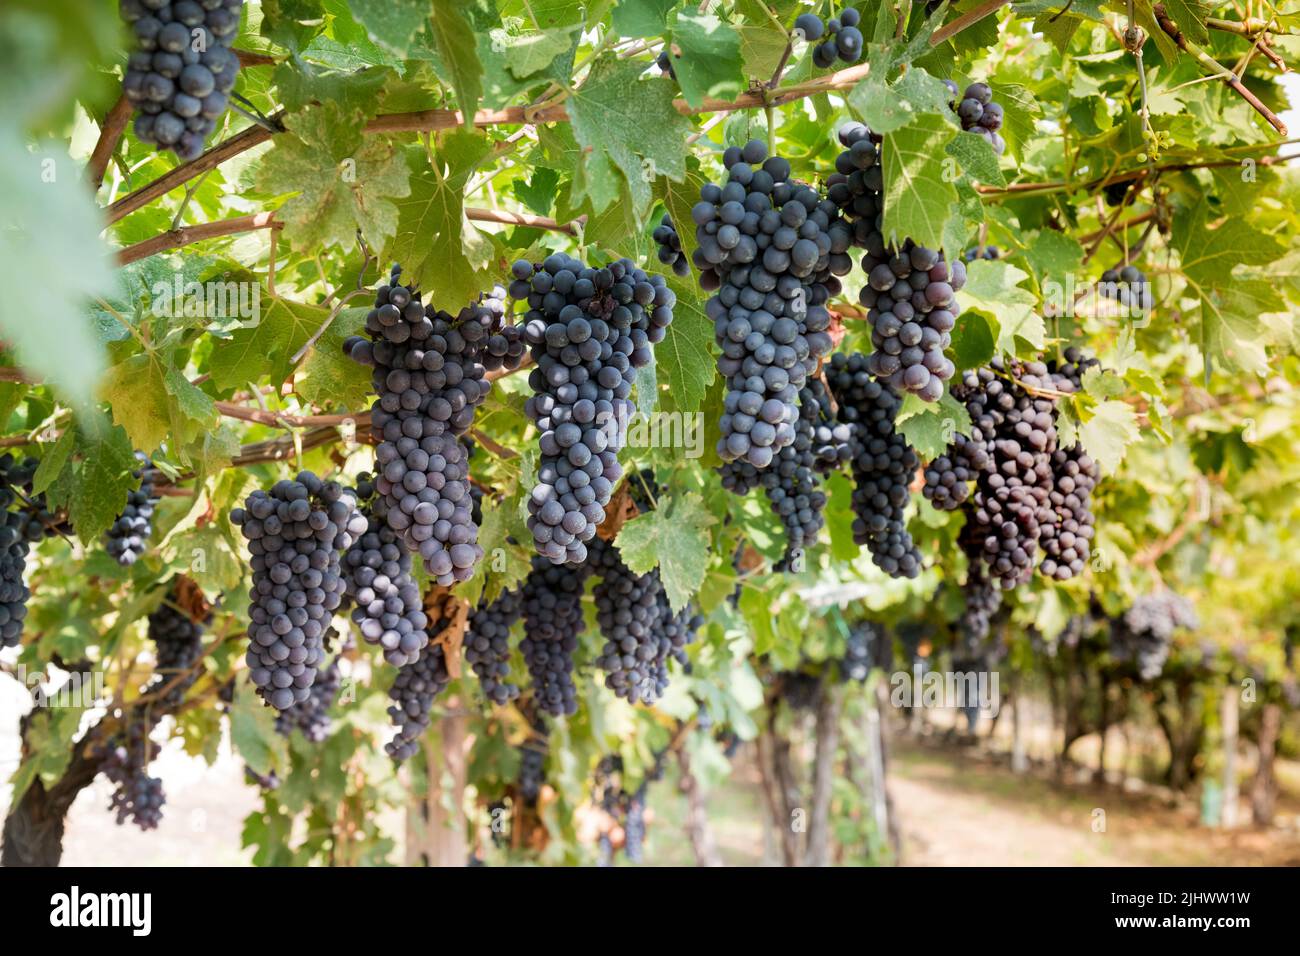 Closeup abundance of black tasty ripe grape bunches hanging on tree branches with lush green leaves in vineyard in countryside Stock Photo